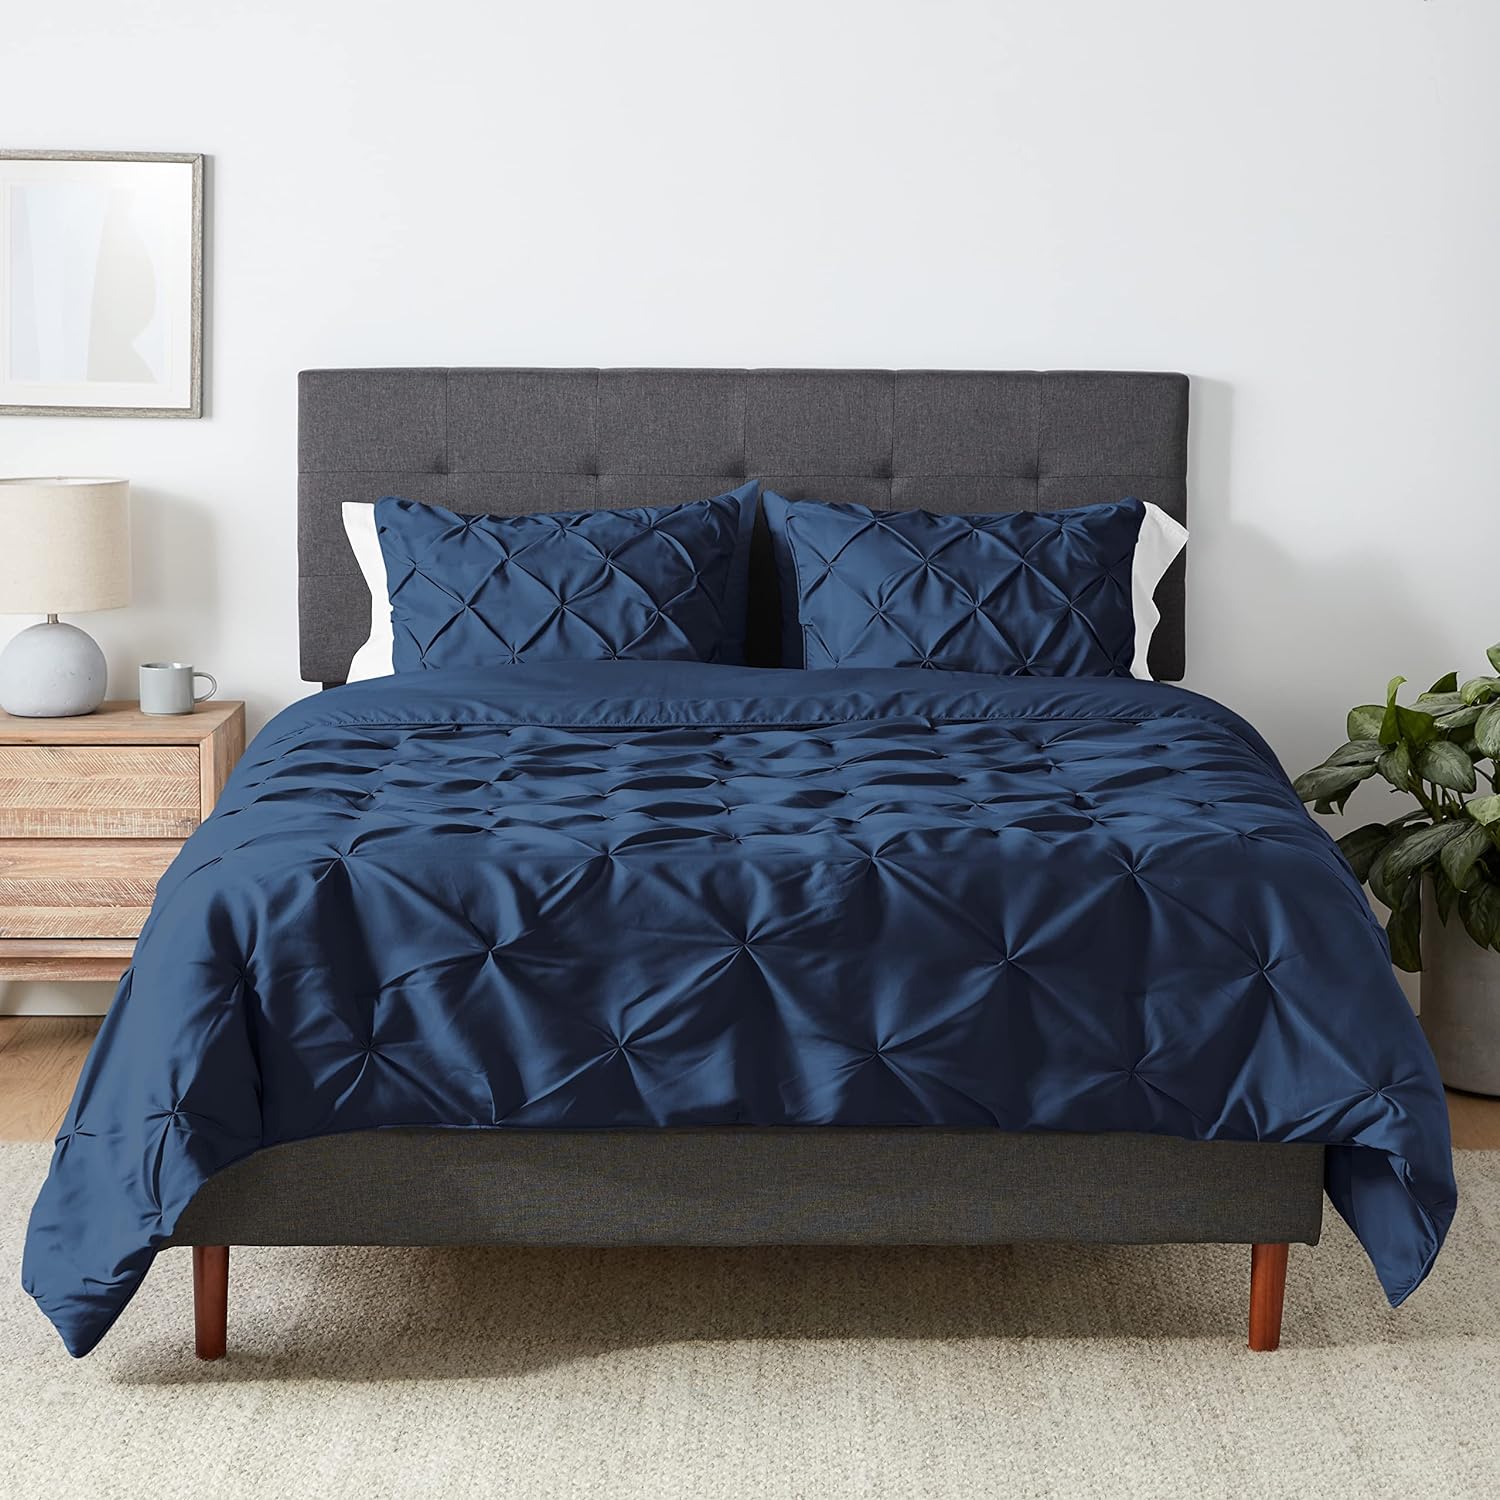 Amazon Basics All-Season Down-Alternative Comforter 3-Piece Bedding Set, Pinch Pleat, Queen, Pinched Pleat With Piped Edges, Navy Blue